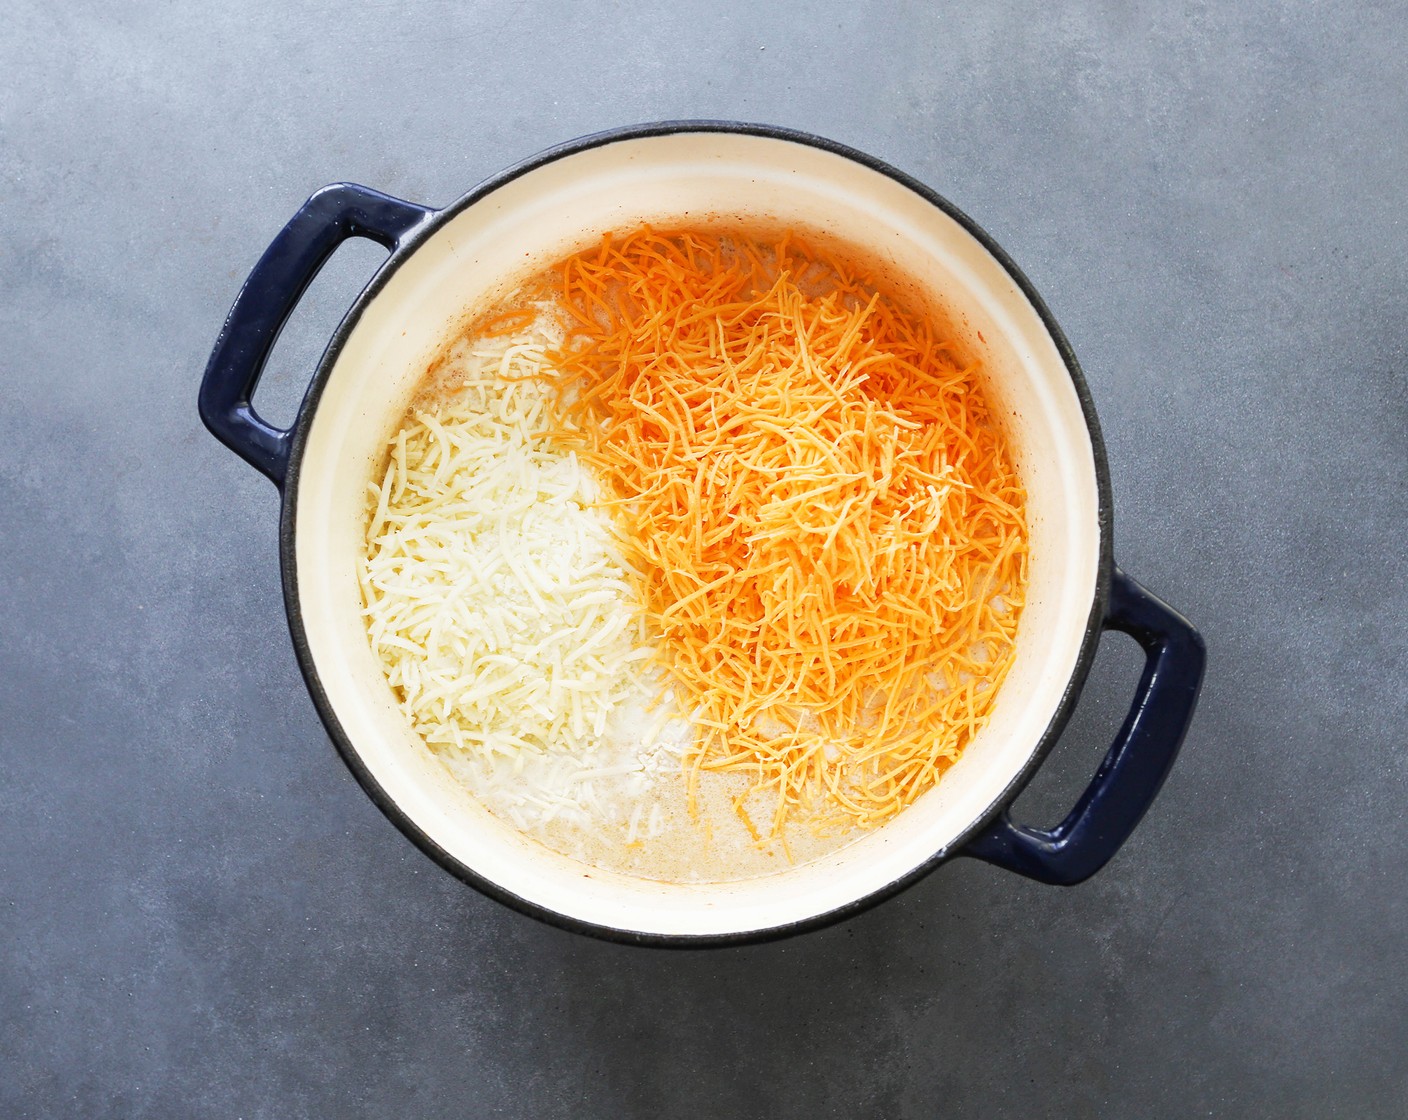 step 6 Add All-Purpose Flour (1/4 cup) and whisk until combined. Add Milk (3 cups) and whisk until mixture is creamy. Add Shredded Cheddar Cheese (2 cups), Shredded Mozzarella Cheese (2 cups), Salt (1 tsp), and Ground Black Pepper (1 tsp) and stir until cheese is melted.